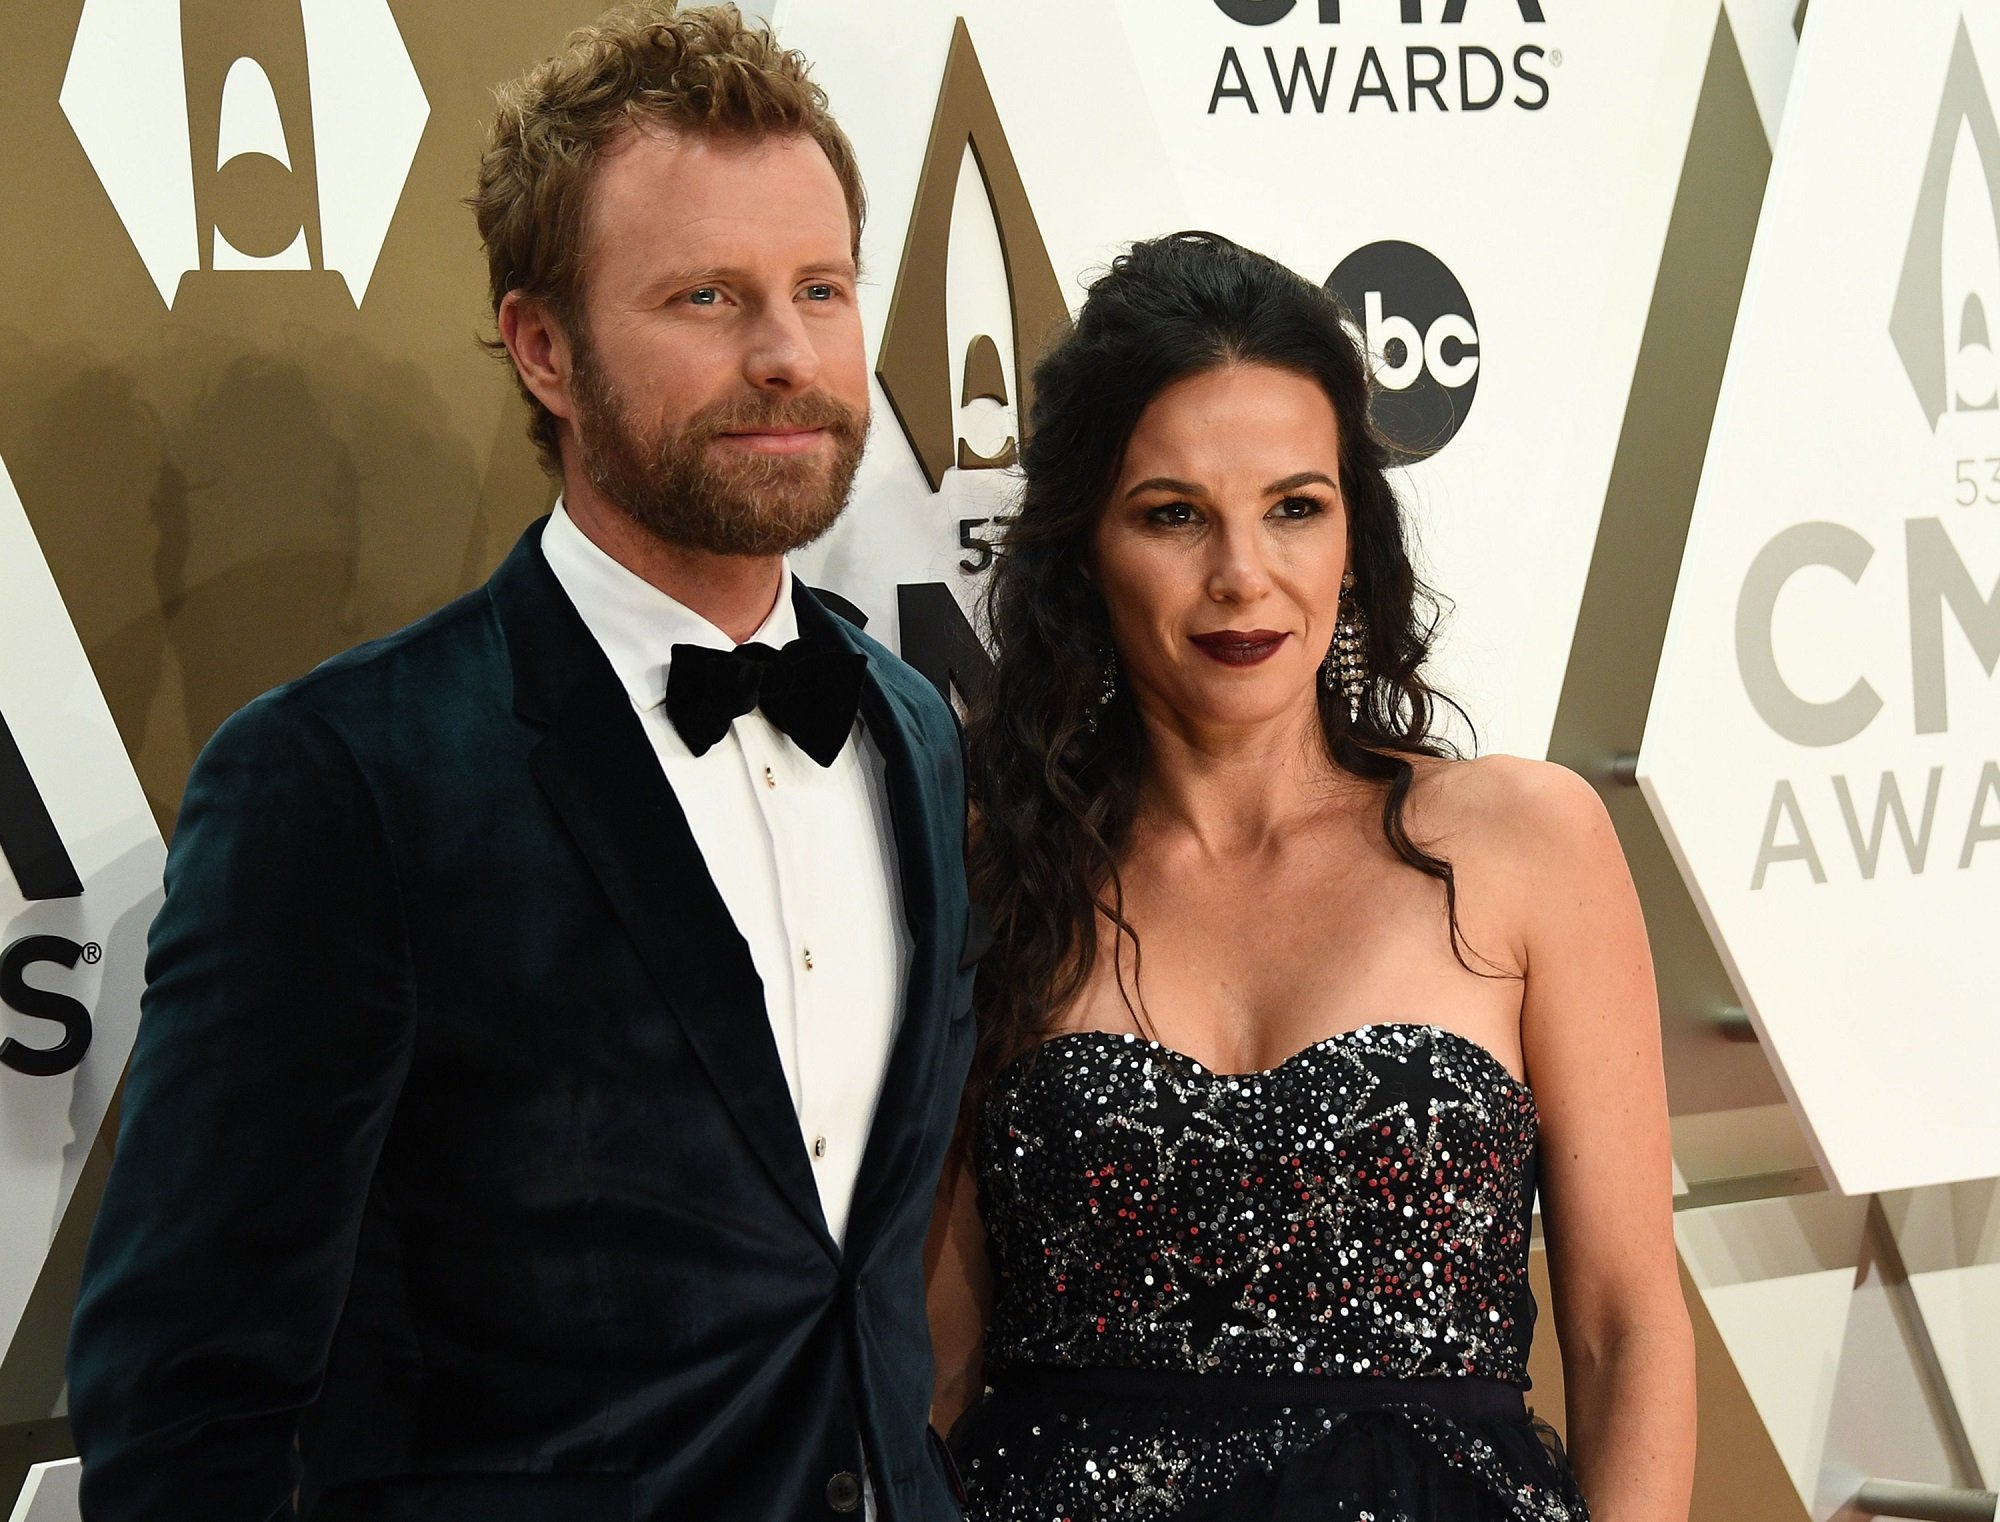 Dierks Bentley and Cassidy Black attend the 53rd Annual CMA Awards